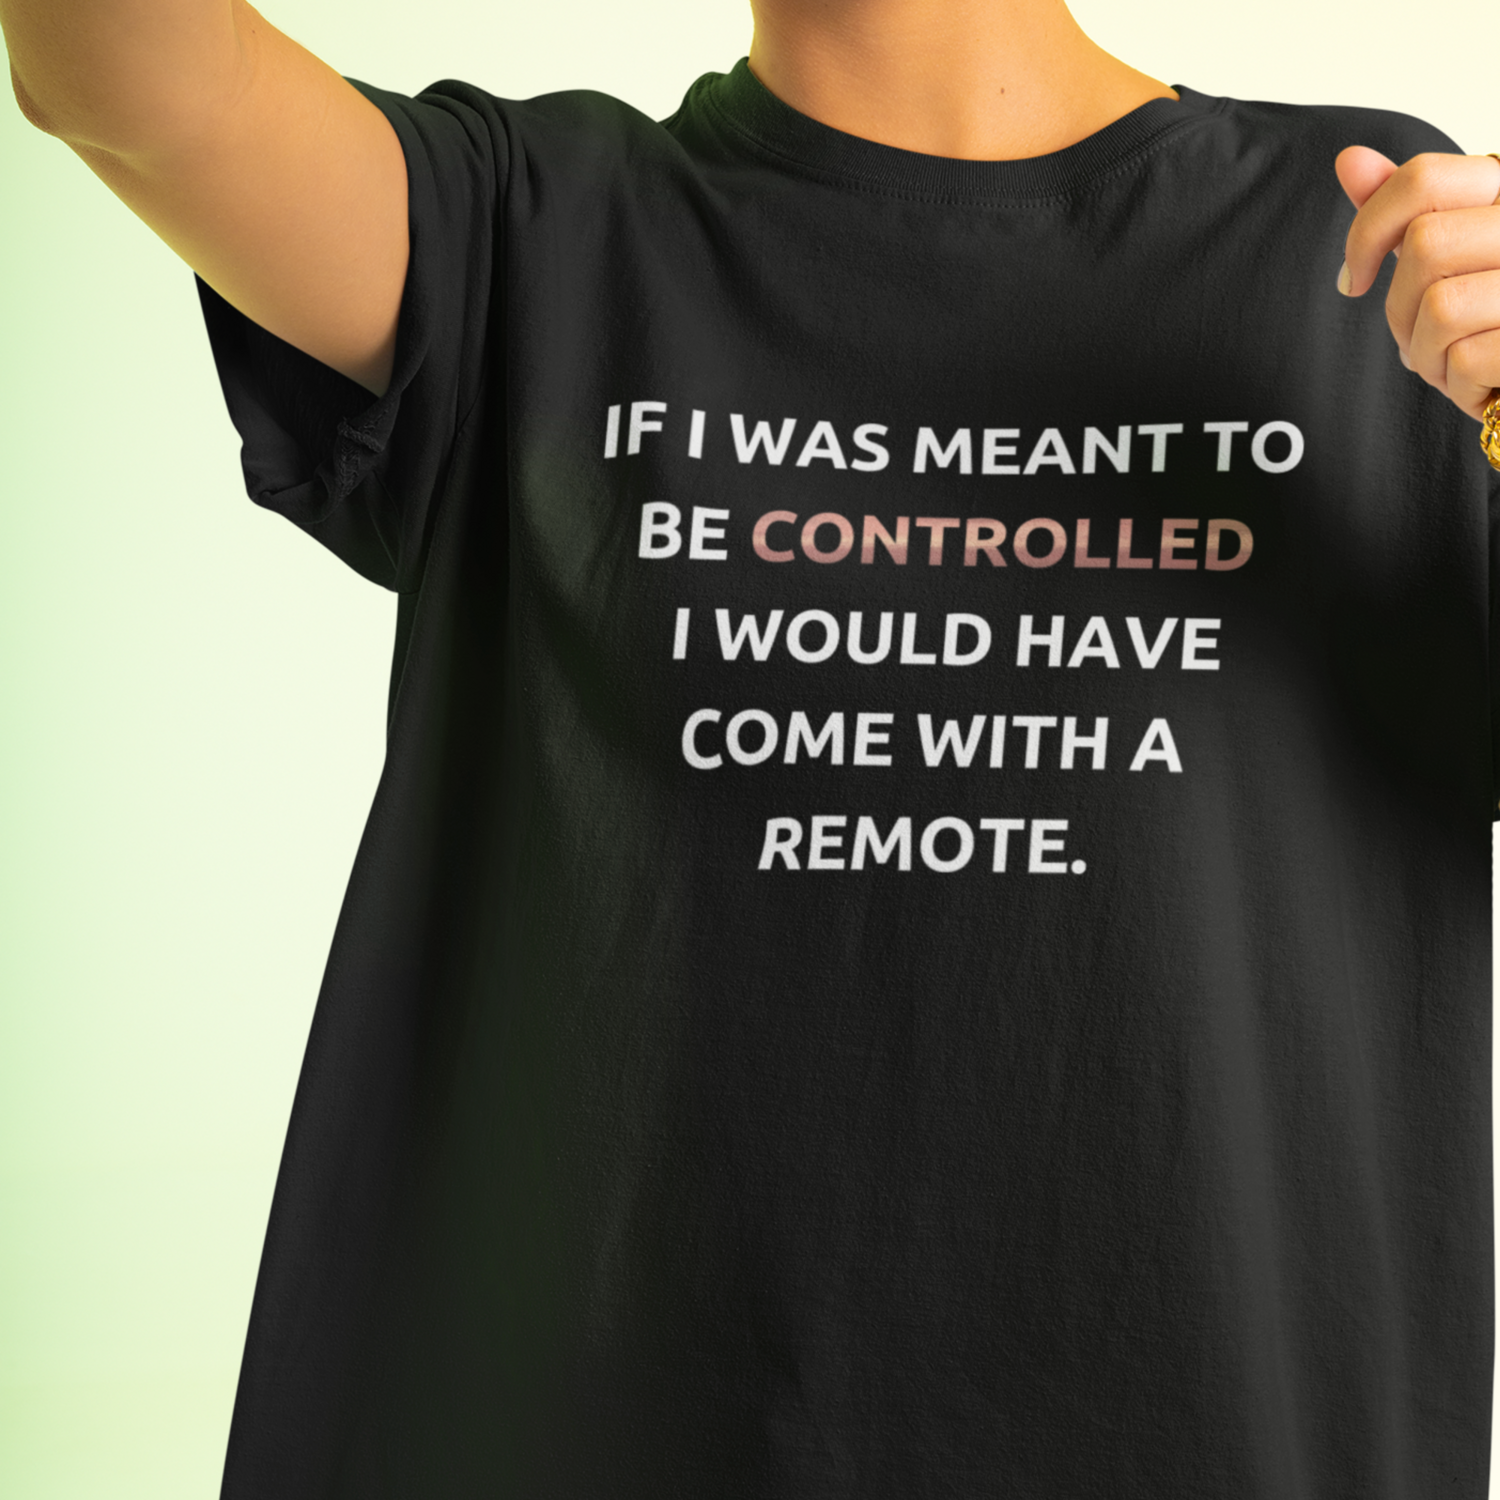 Controlled Black T-Shirt Unisex - Small - 5xl